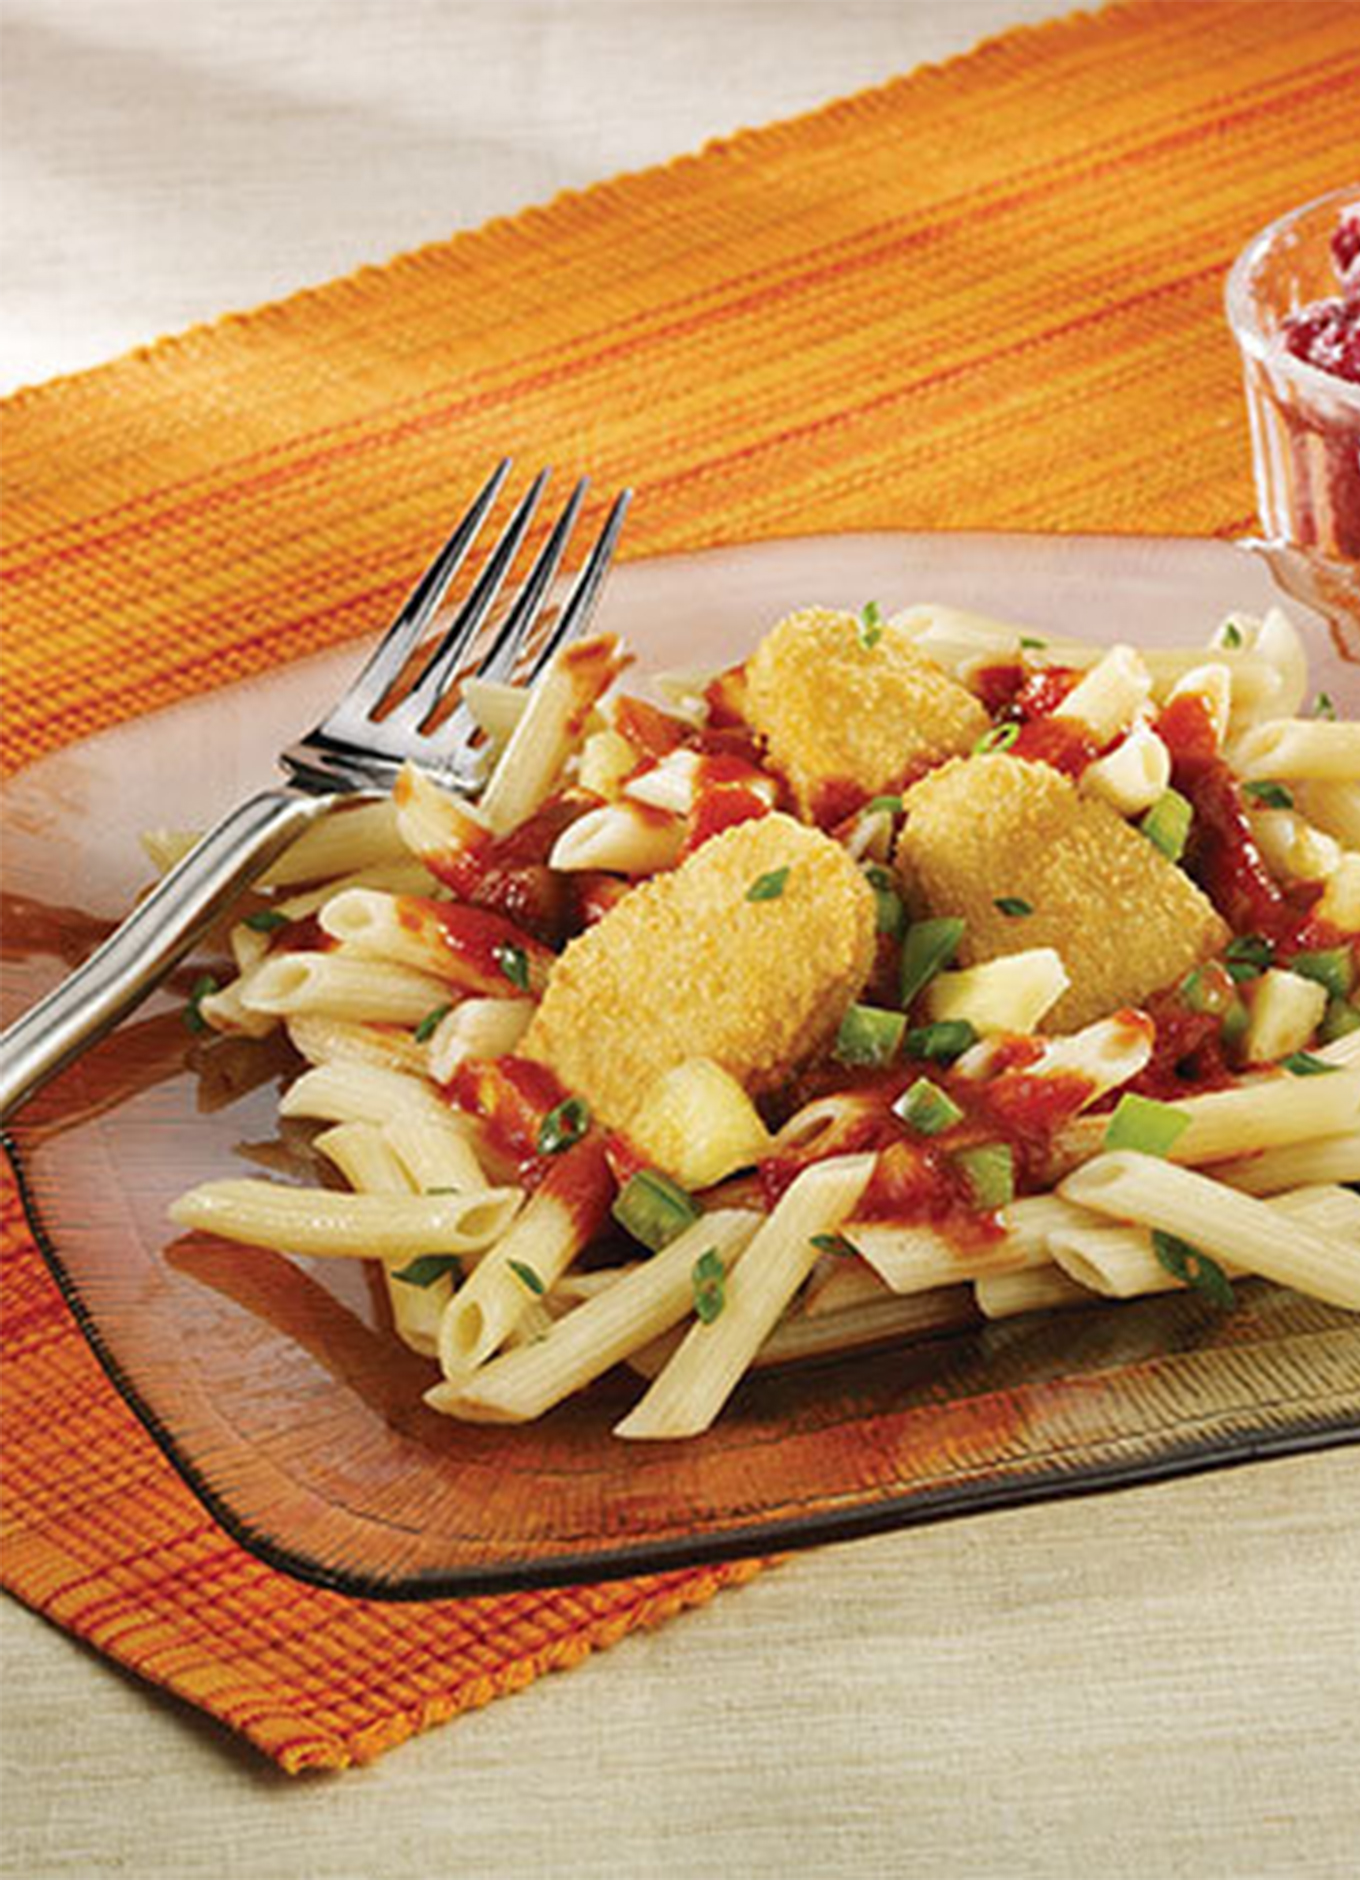 Pineapple Chicken Nuggets on a tropical bed of pasta with a side of fresh raspberries.